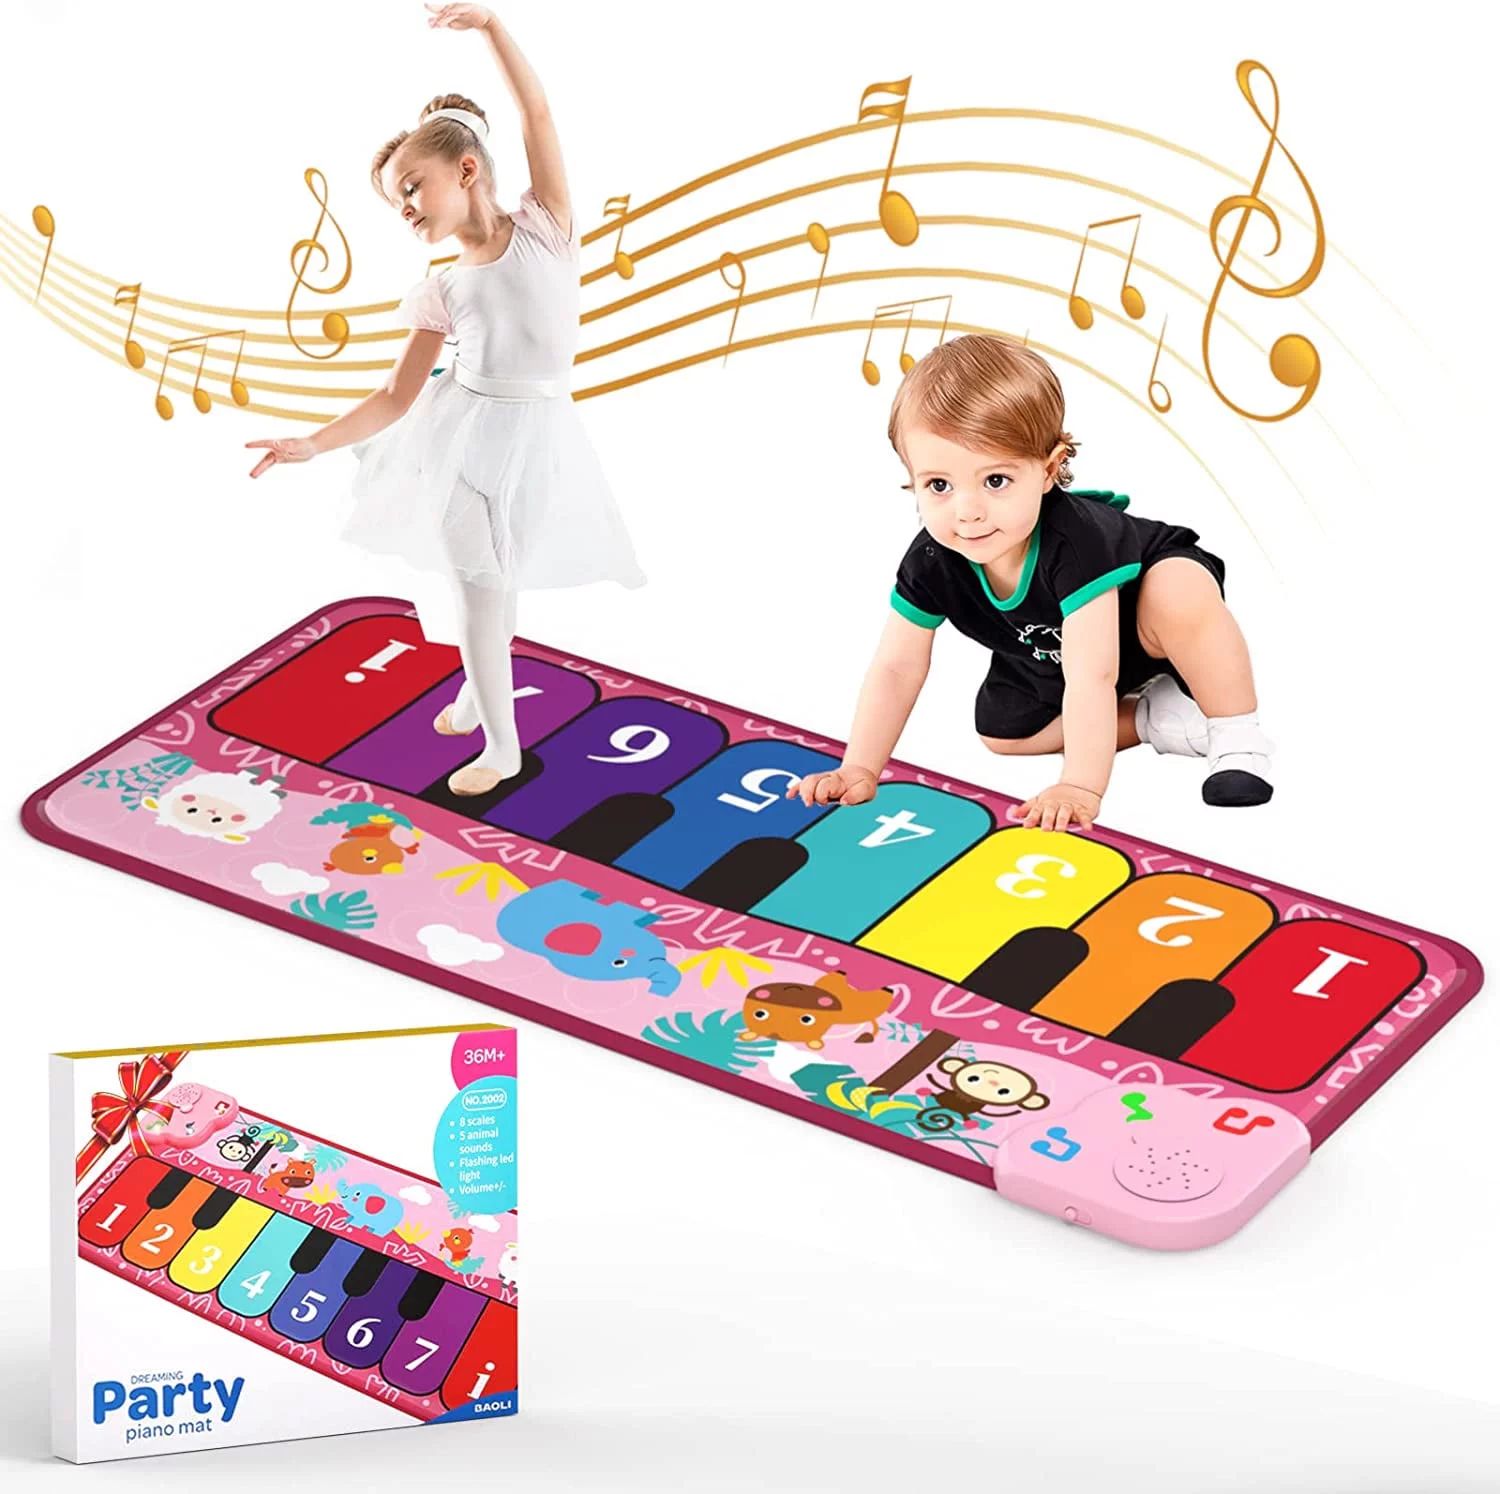 Zmoon Piano Musical Mat for Kids Toddlers Dance Mat Early Education Musical Toy Ages 24 Months + | Walmart (US)